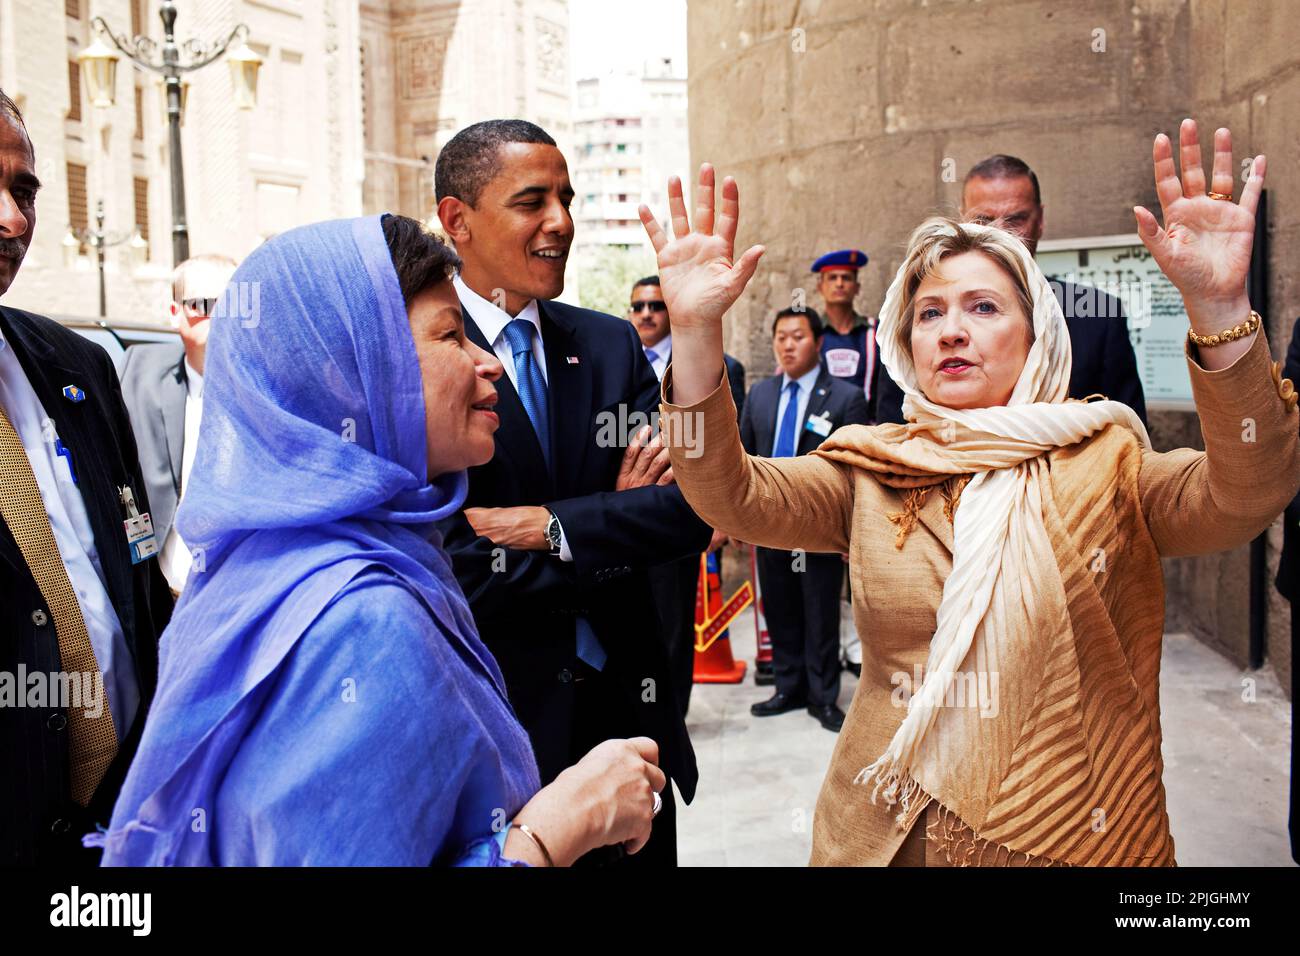 President Barack Obama, Senior Advisors David Axelrod and Valerie Jarrett, and Secretary of State Hillary Clinton tour the Sultan Hassan Mosque in Cairo, Egypt, June 4, 2009. (Official White House Photo by Pete Souza) This official White House photograph is being made available for publication by news organizations and/or for personal use printing by the subject(s) of the photograph. The photograph may not be manipulated in any way or used in materials, advertisements, products, or promotions that in any way suggest approval or endorsement of the President, the First Family, or the White House Stock Photo